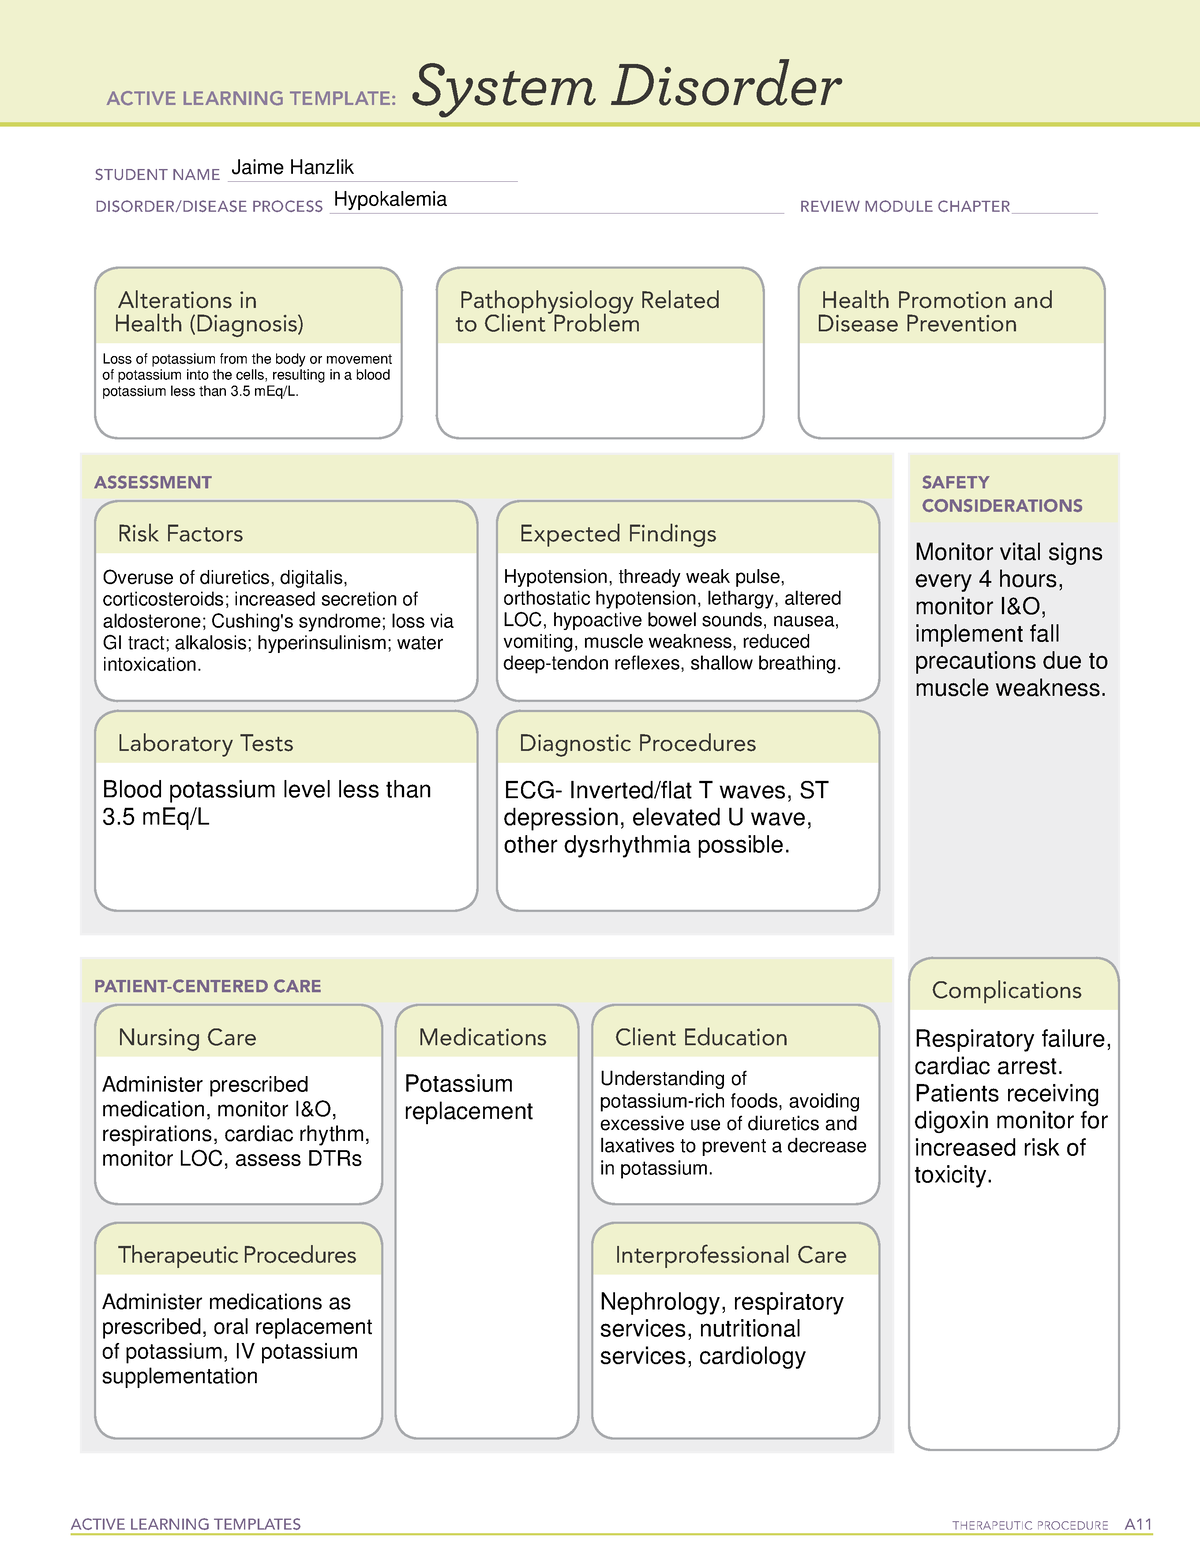 ATI System Disorder Hyperkalemia ACTIVE LEARNING TEMPLATES